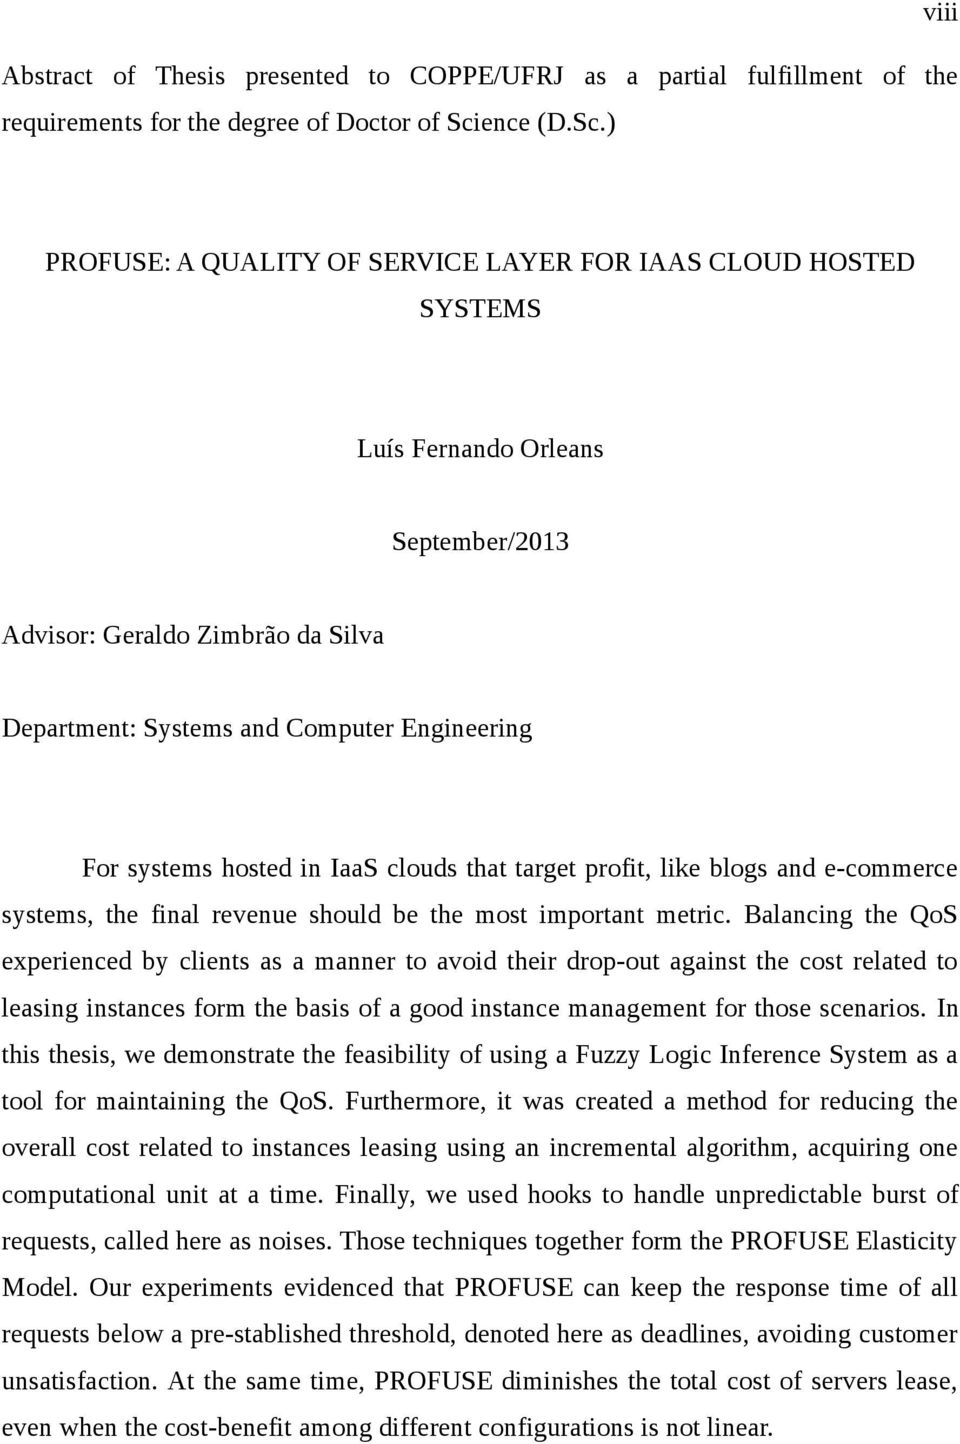 ) viii PROFUSE: A QUALITY OF SERVICE LAYER FOR IAAS CLOUD HOSTED SYSTEMS Luís Fernando Orleans September/2013 Advisor: Geraldo Zimbrão da Silva Department: Systems and Computer Engineering For